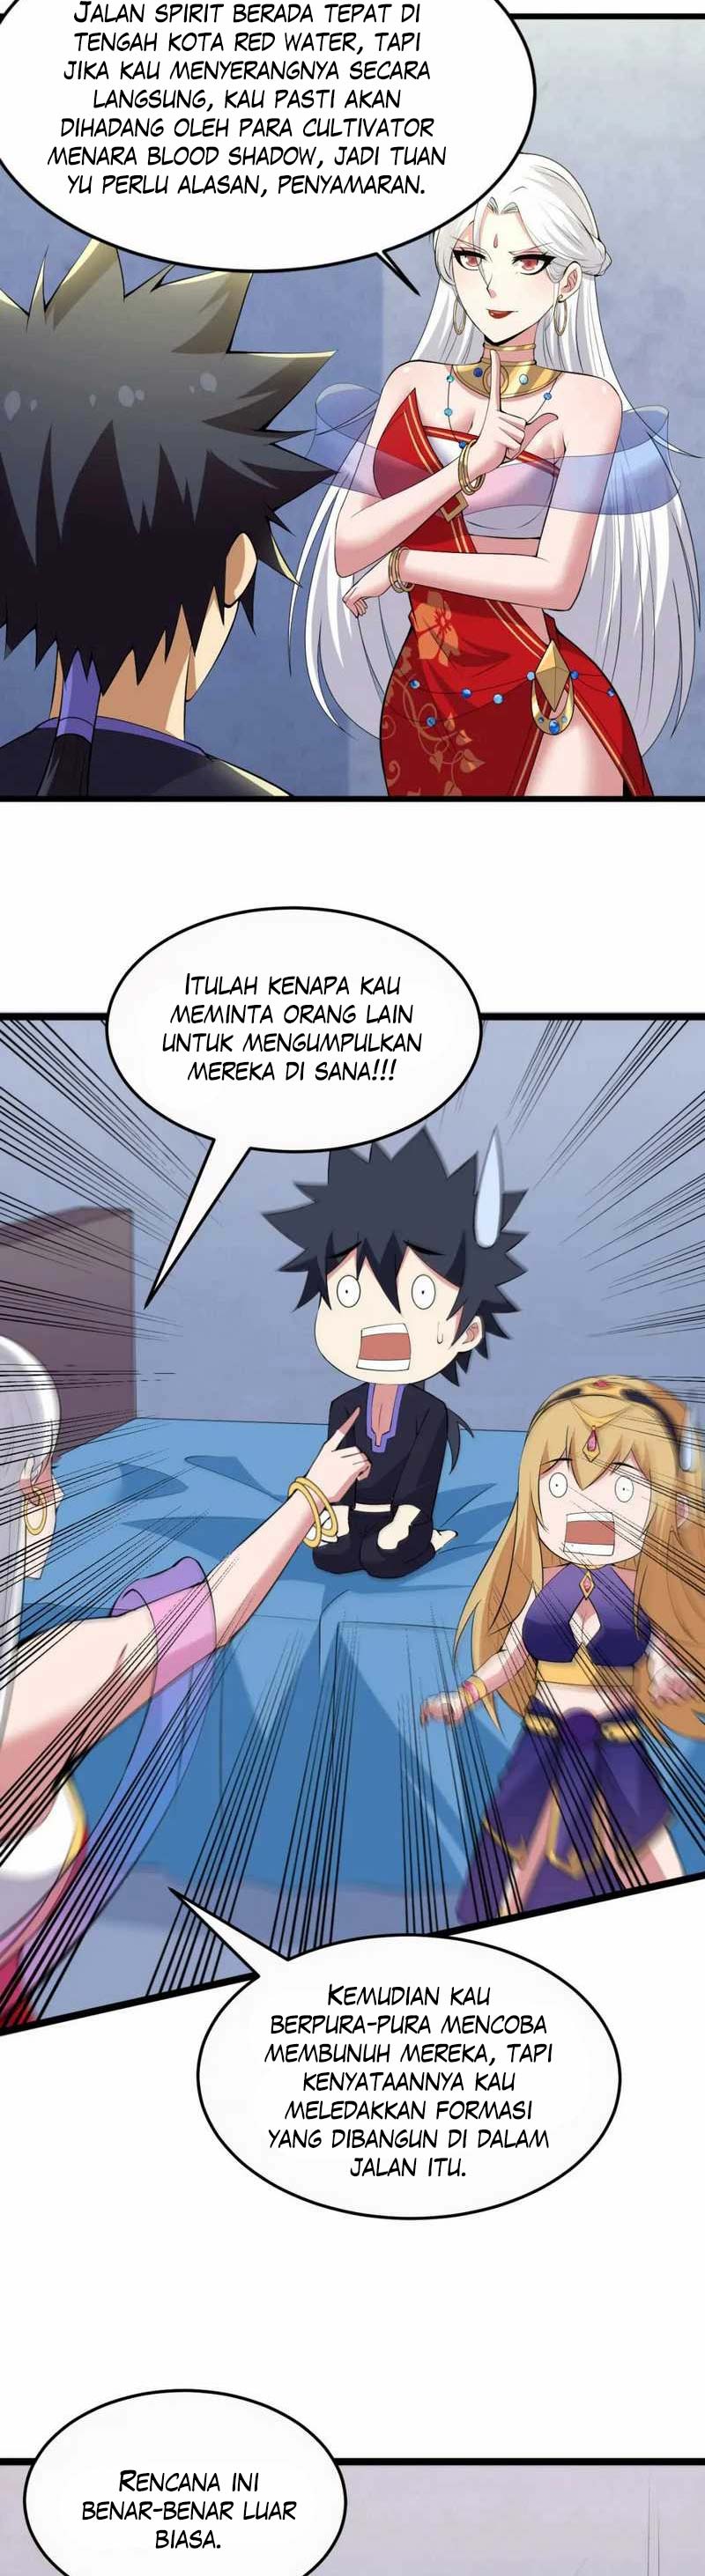 Dilarang COPAS - situs resmi www.mangacanblog.com - Komik i just want to be beaten to death by everyone 138 - chapter 138 139 Indonesia i just want to be beaten to death by everyone 138 - chapter 138 Terbaru 12|Baca Manga Komik Indonesia|Mangacan